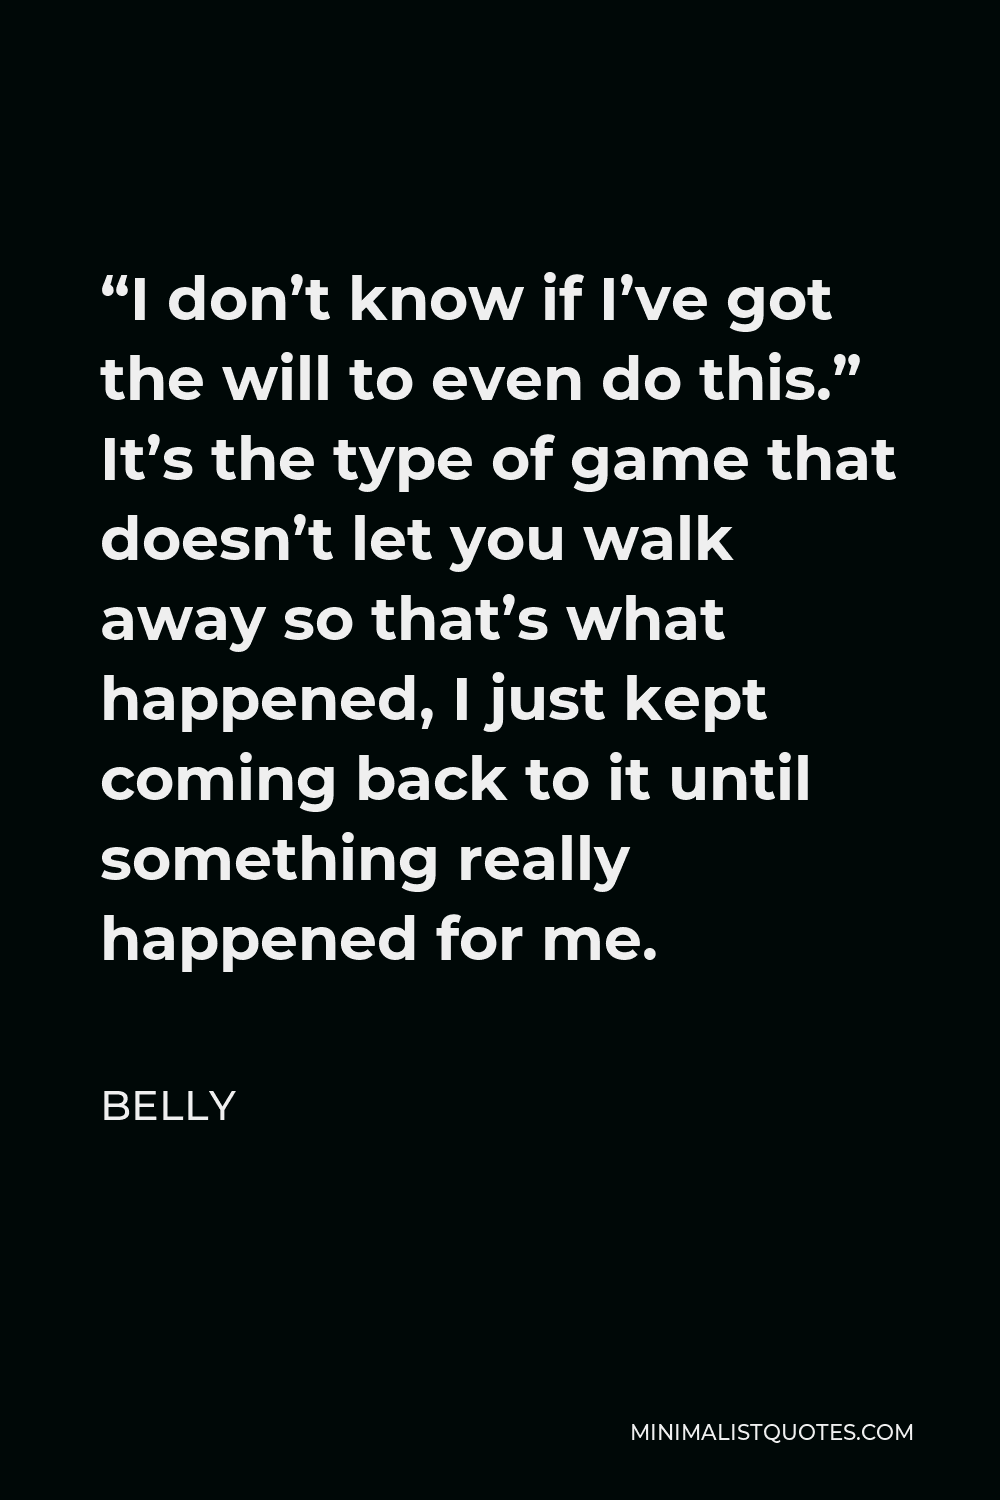 Belly Quote - “I don’t know if I’ve got the will to even do this.” It’s the type of game that doesn’t let you walk away so that’s what happened, I just kept coming back to it until something really happened for me.